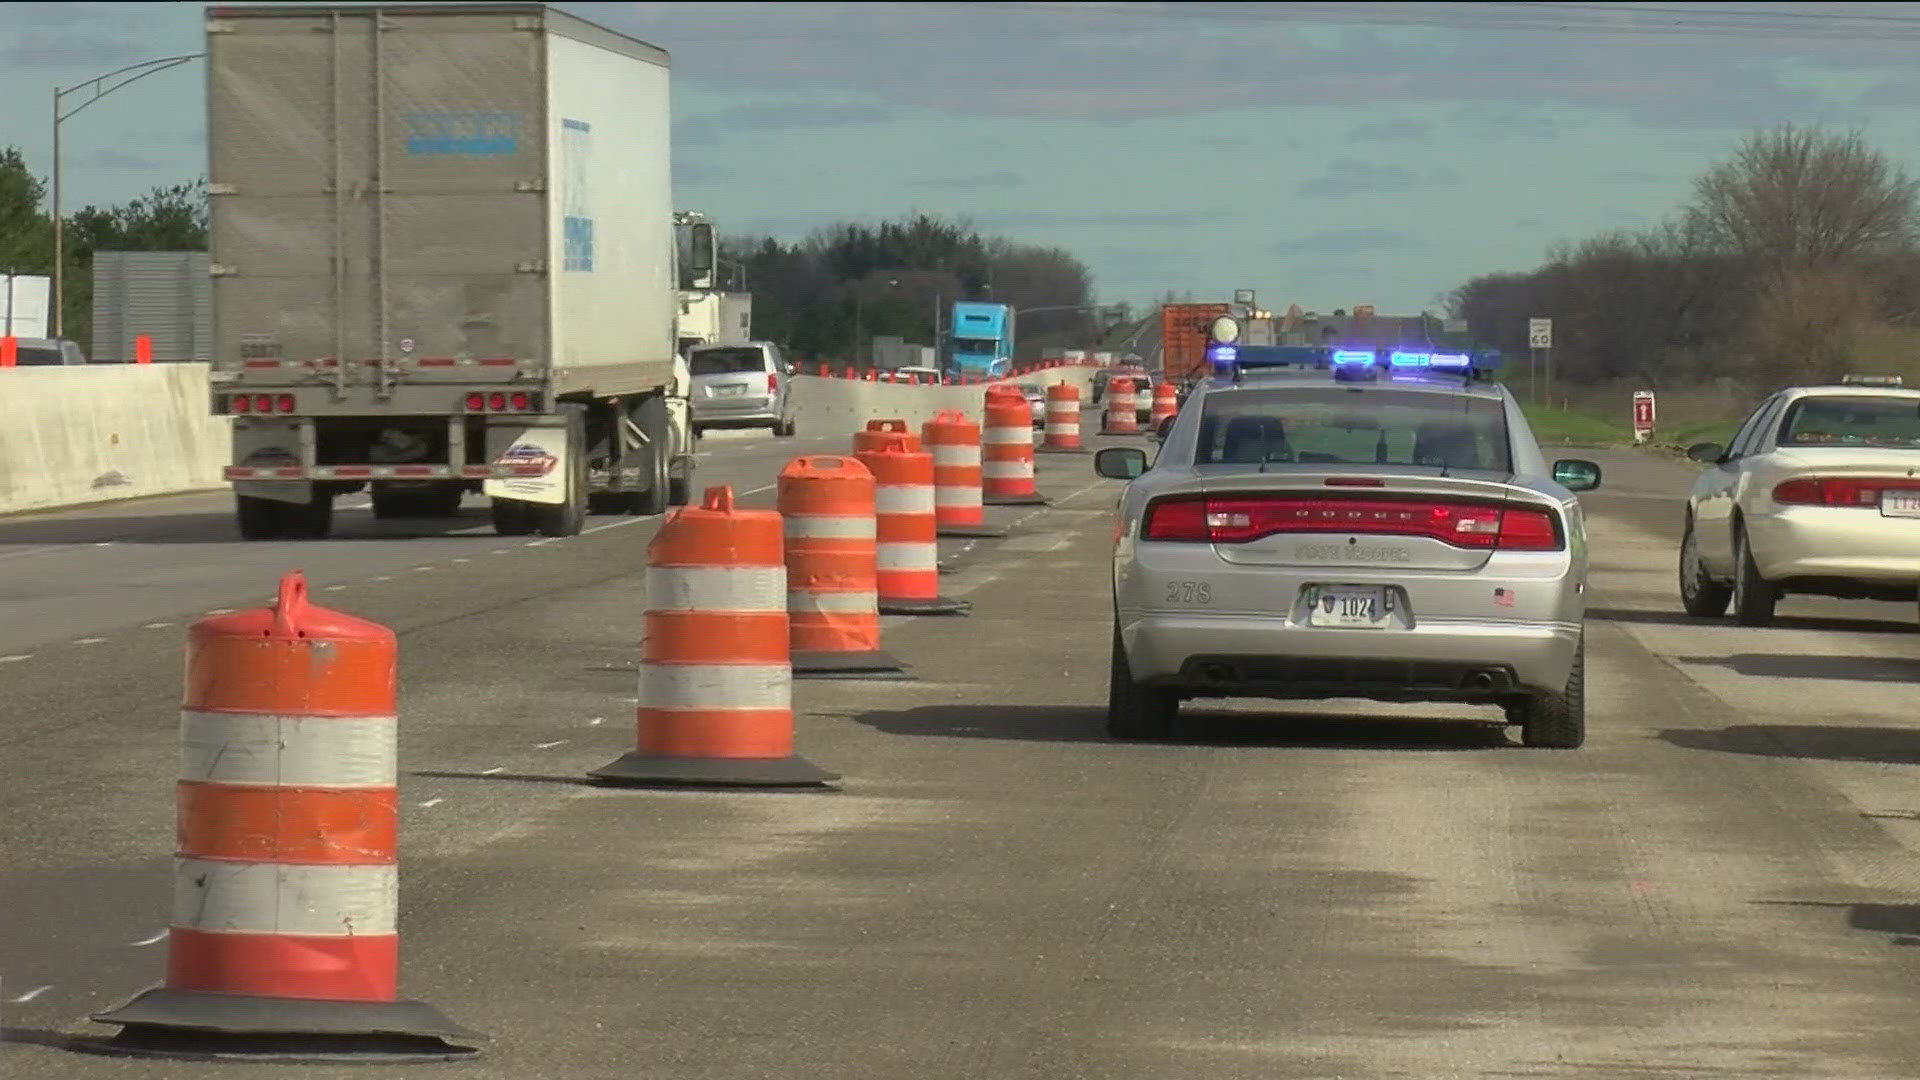 Ohio State Highway Patrol encourages drivers to be safe and look out for each other during some of the most dangerous travel days of the year.